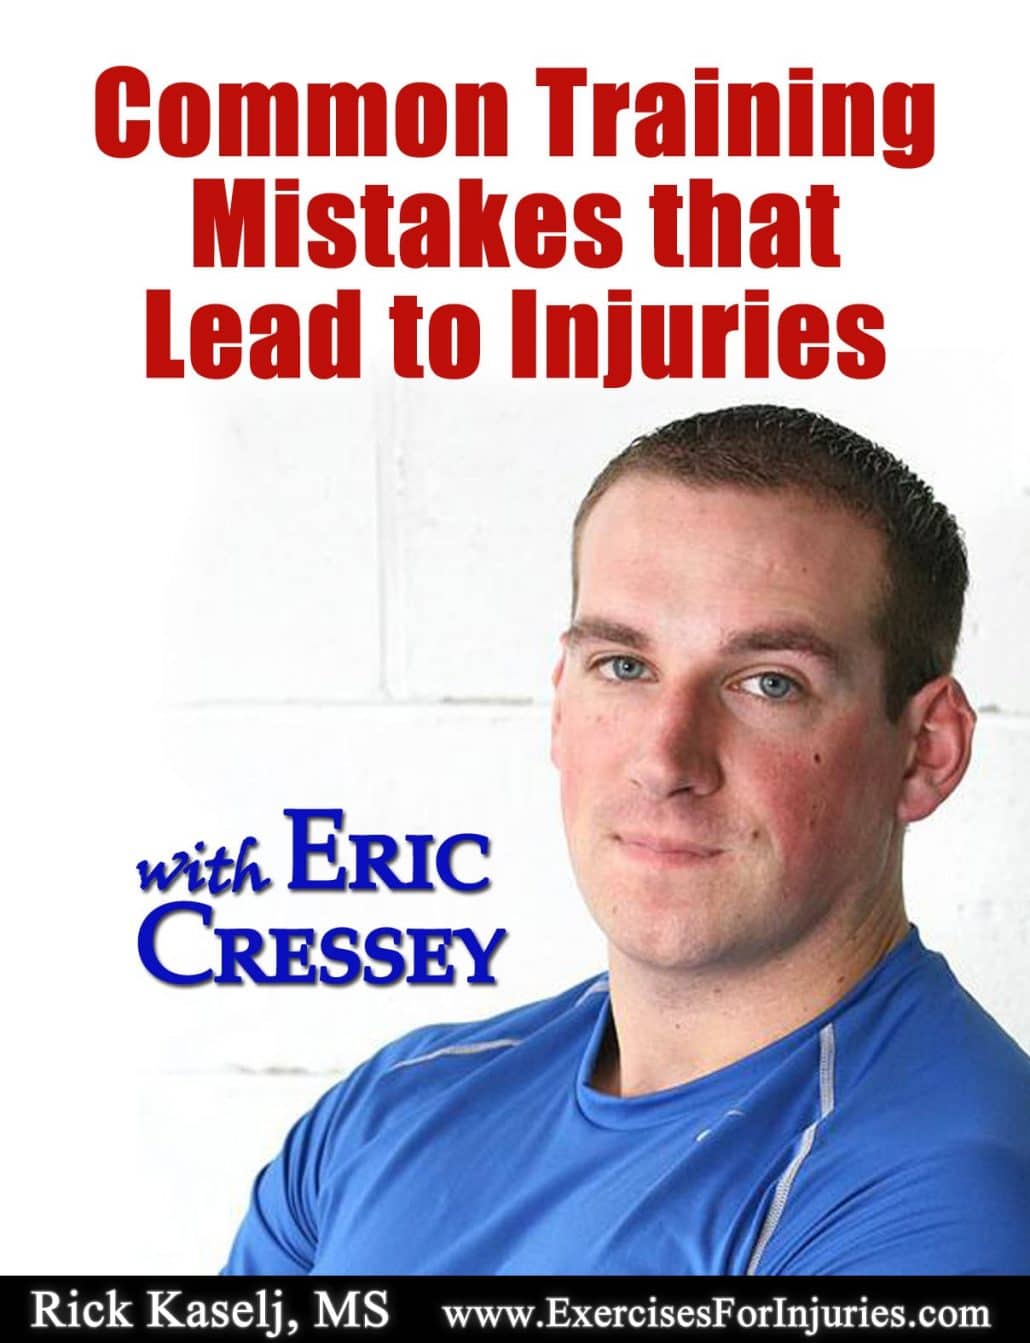 Common Training Mistakes that Lead to Injuries with Eric Cressey